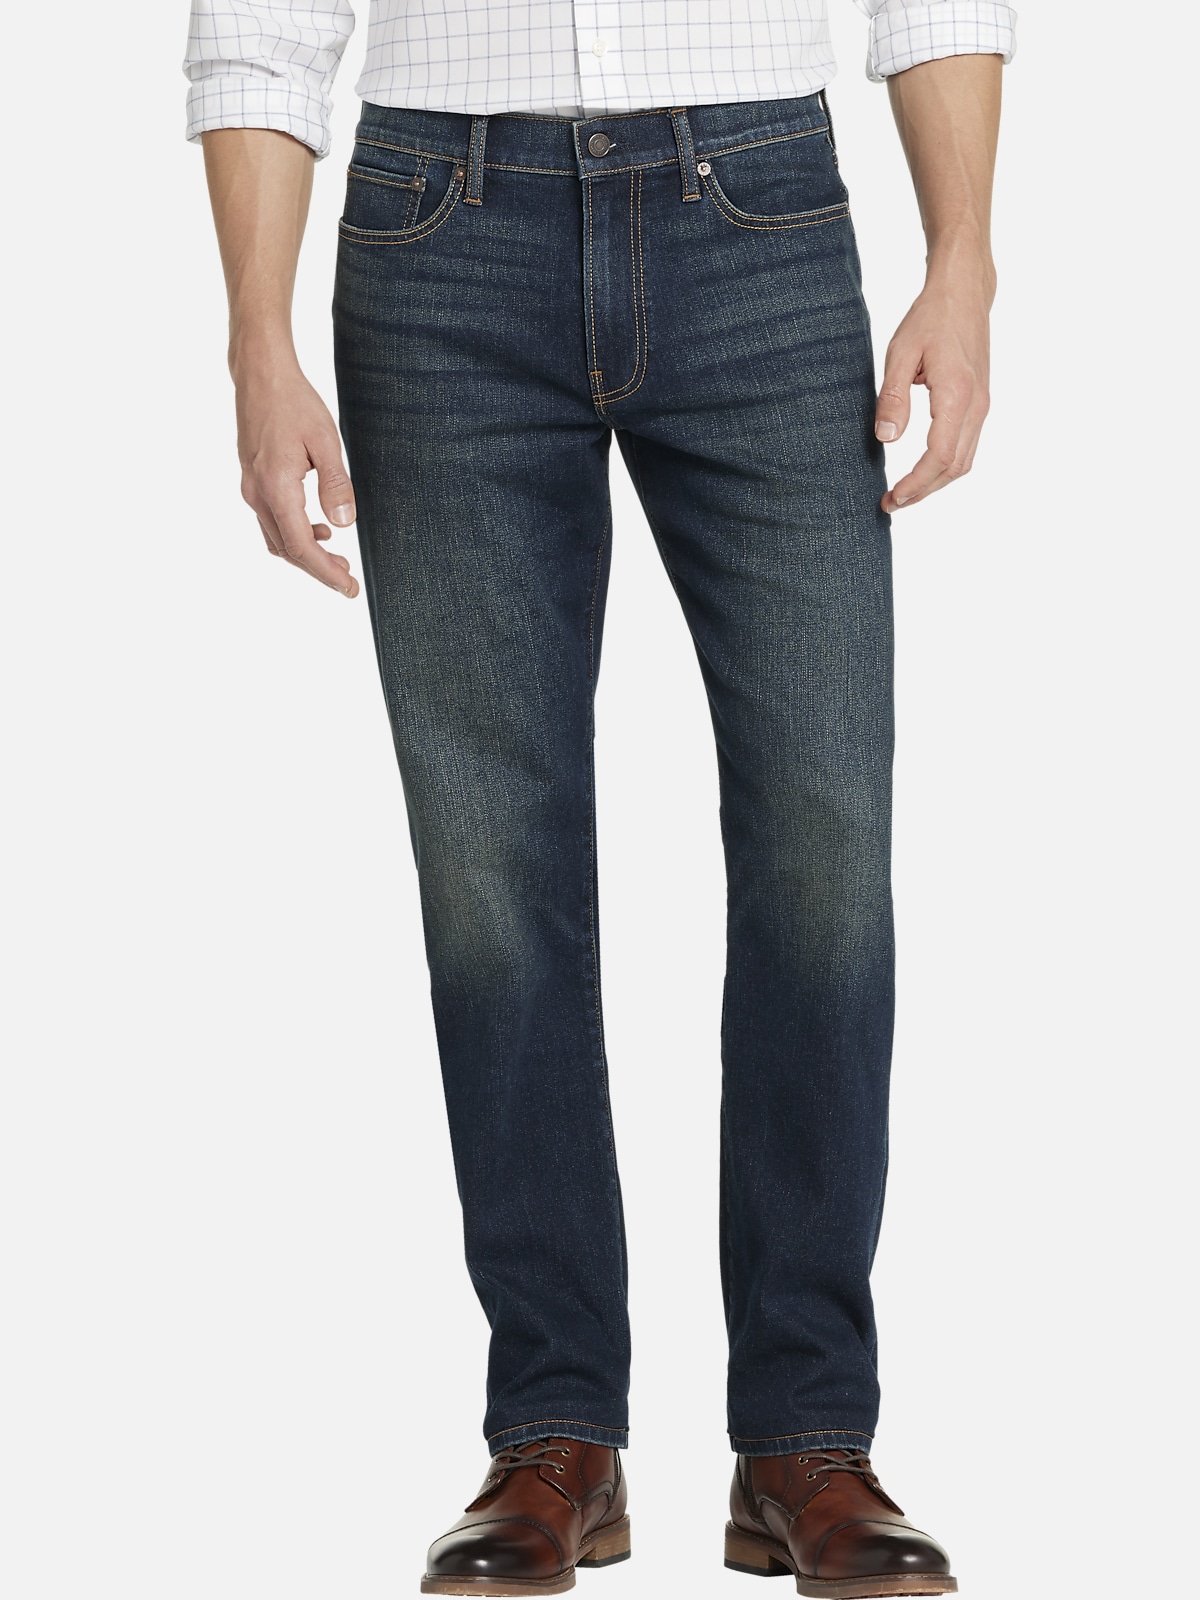 Lucky Brand Light Wash Distressed Jeans